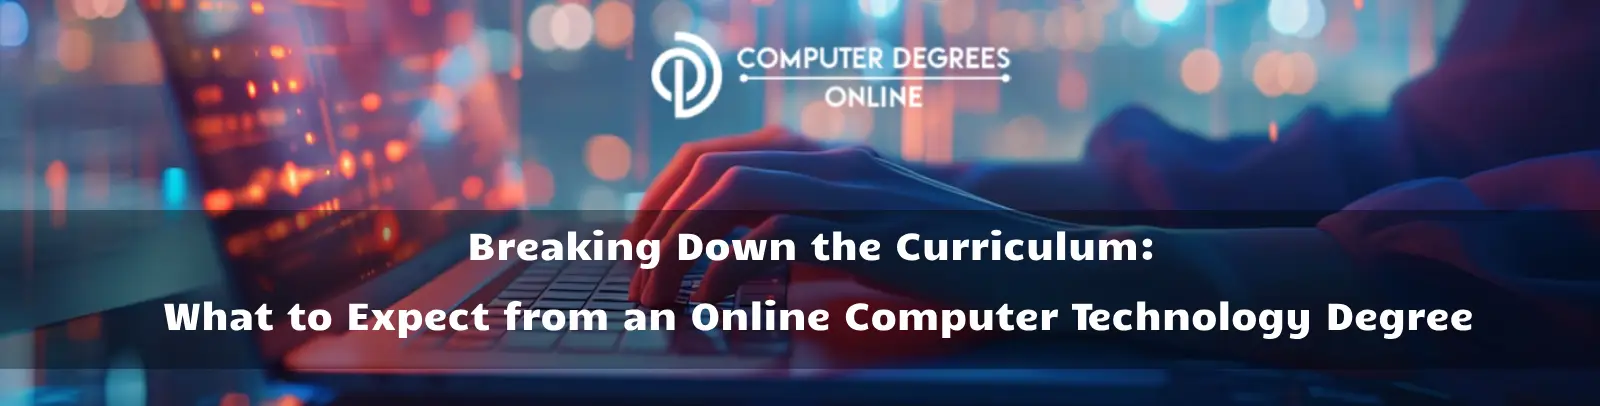 What to Expect from an Online Computer Technology Degree